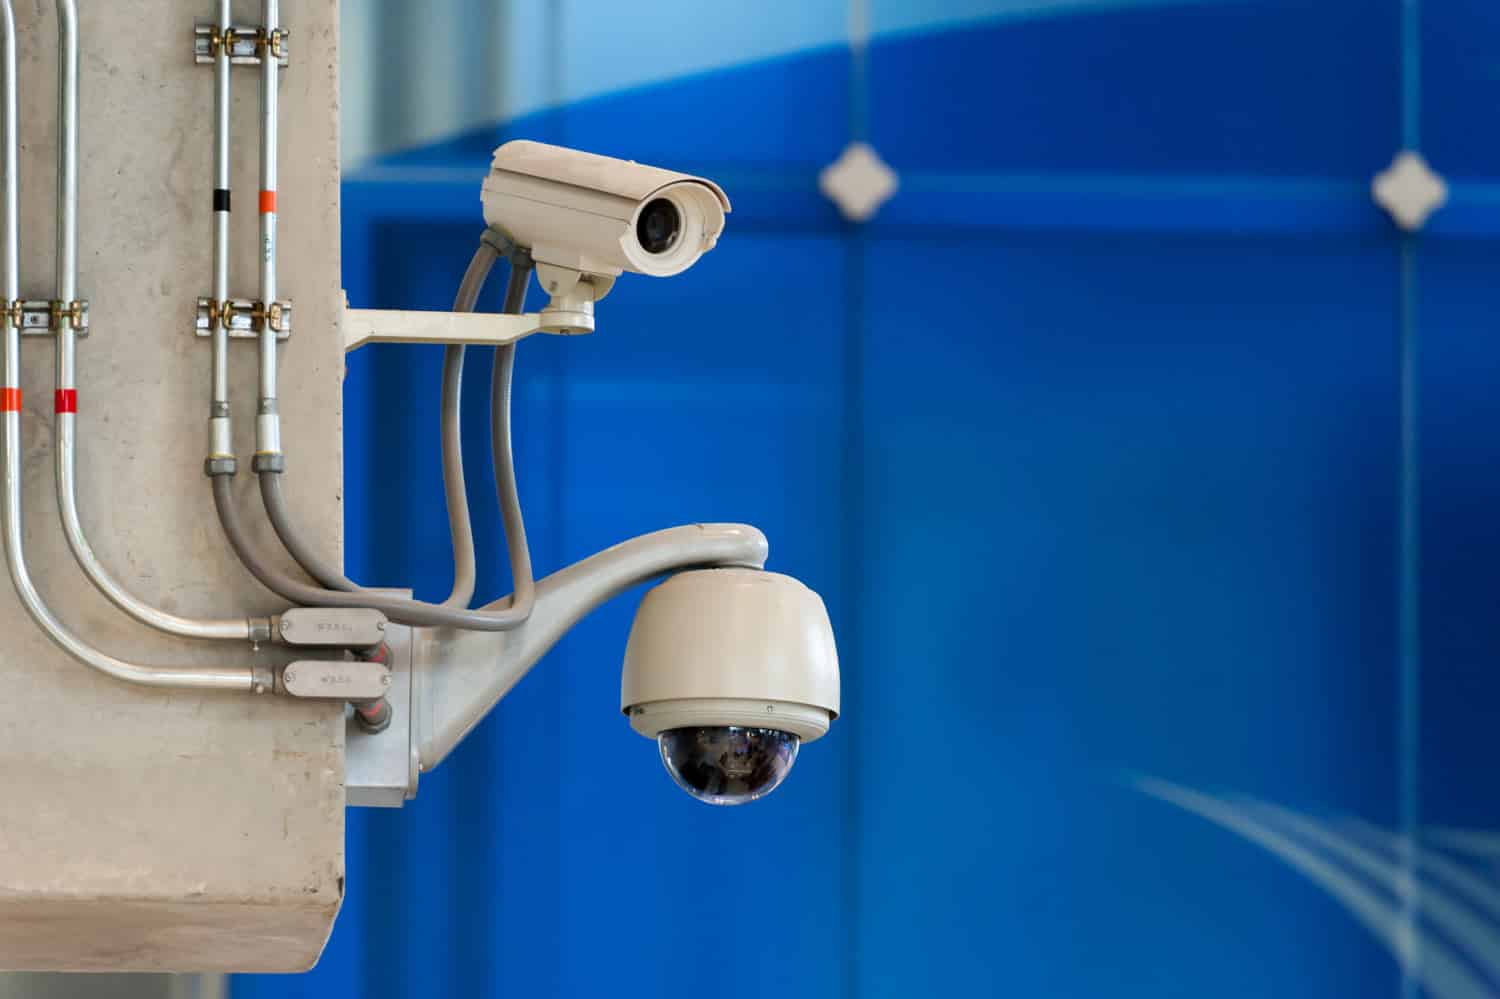 Number-of-Security-Cameras-Your-Business-Needs